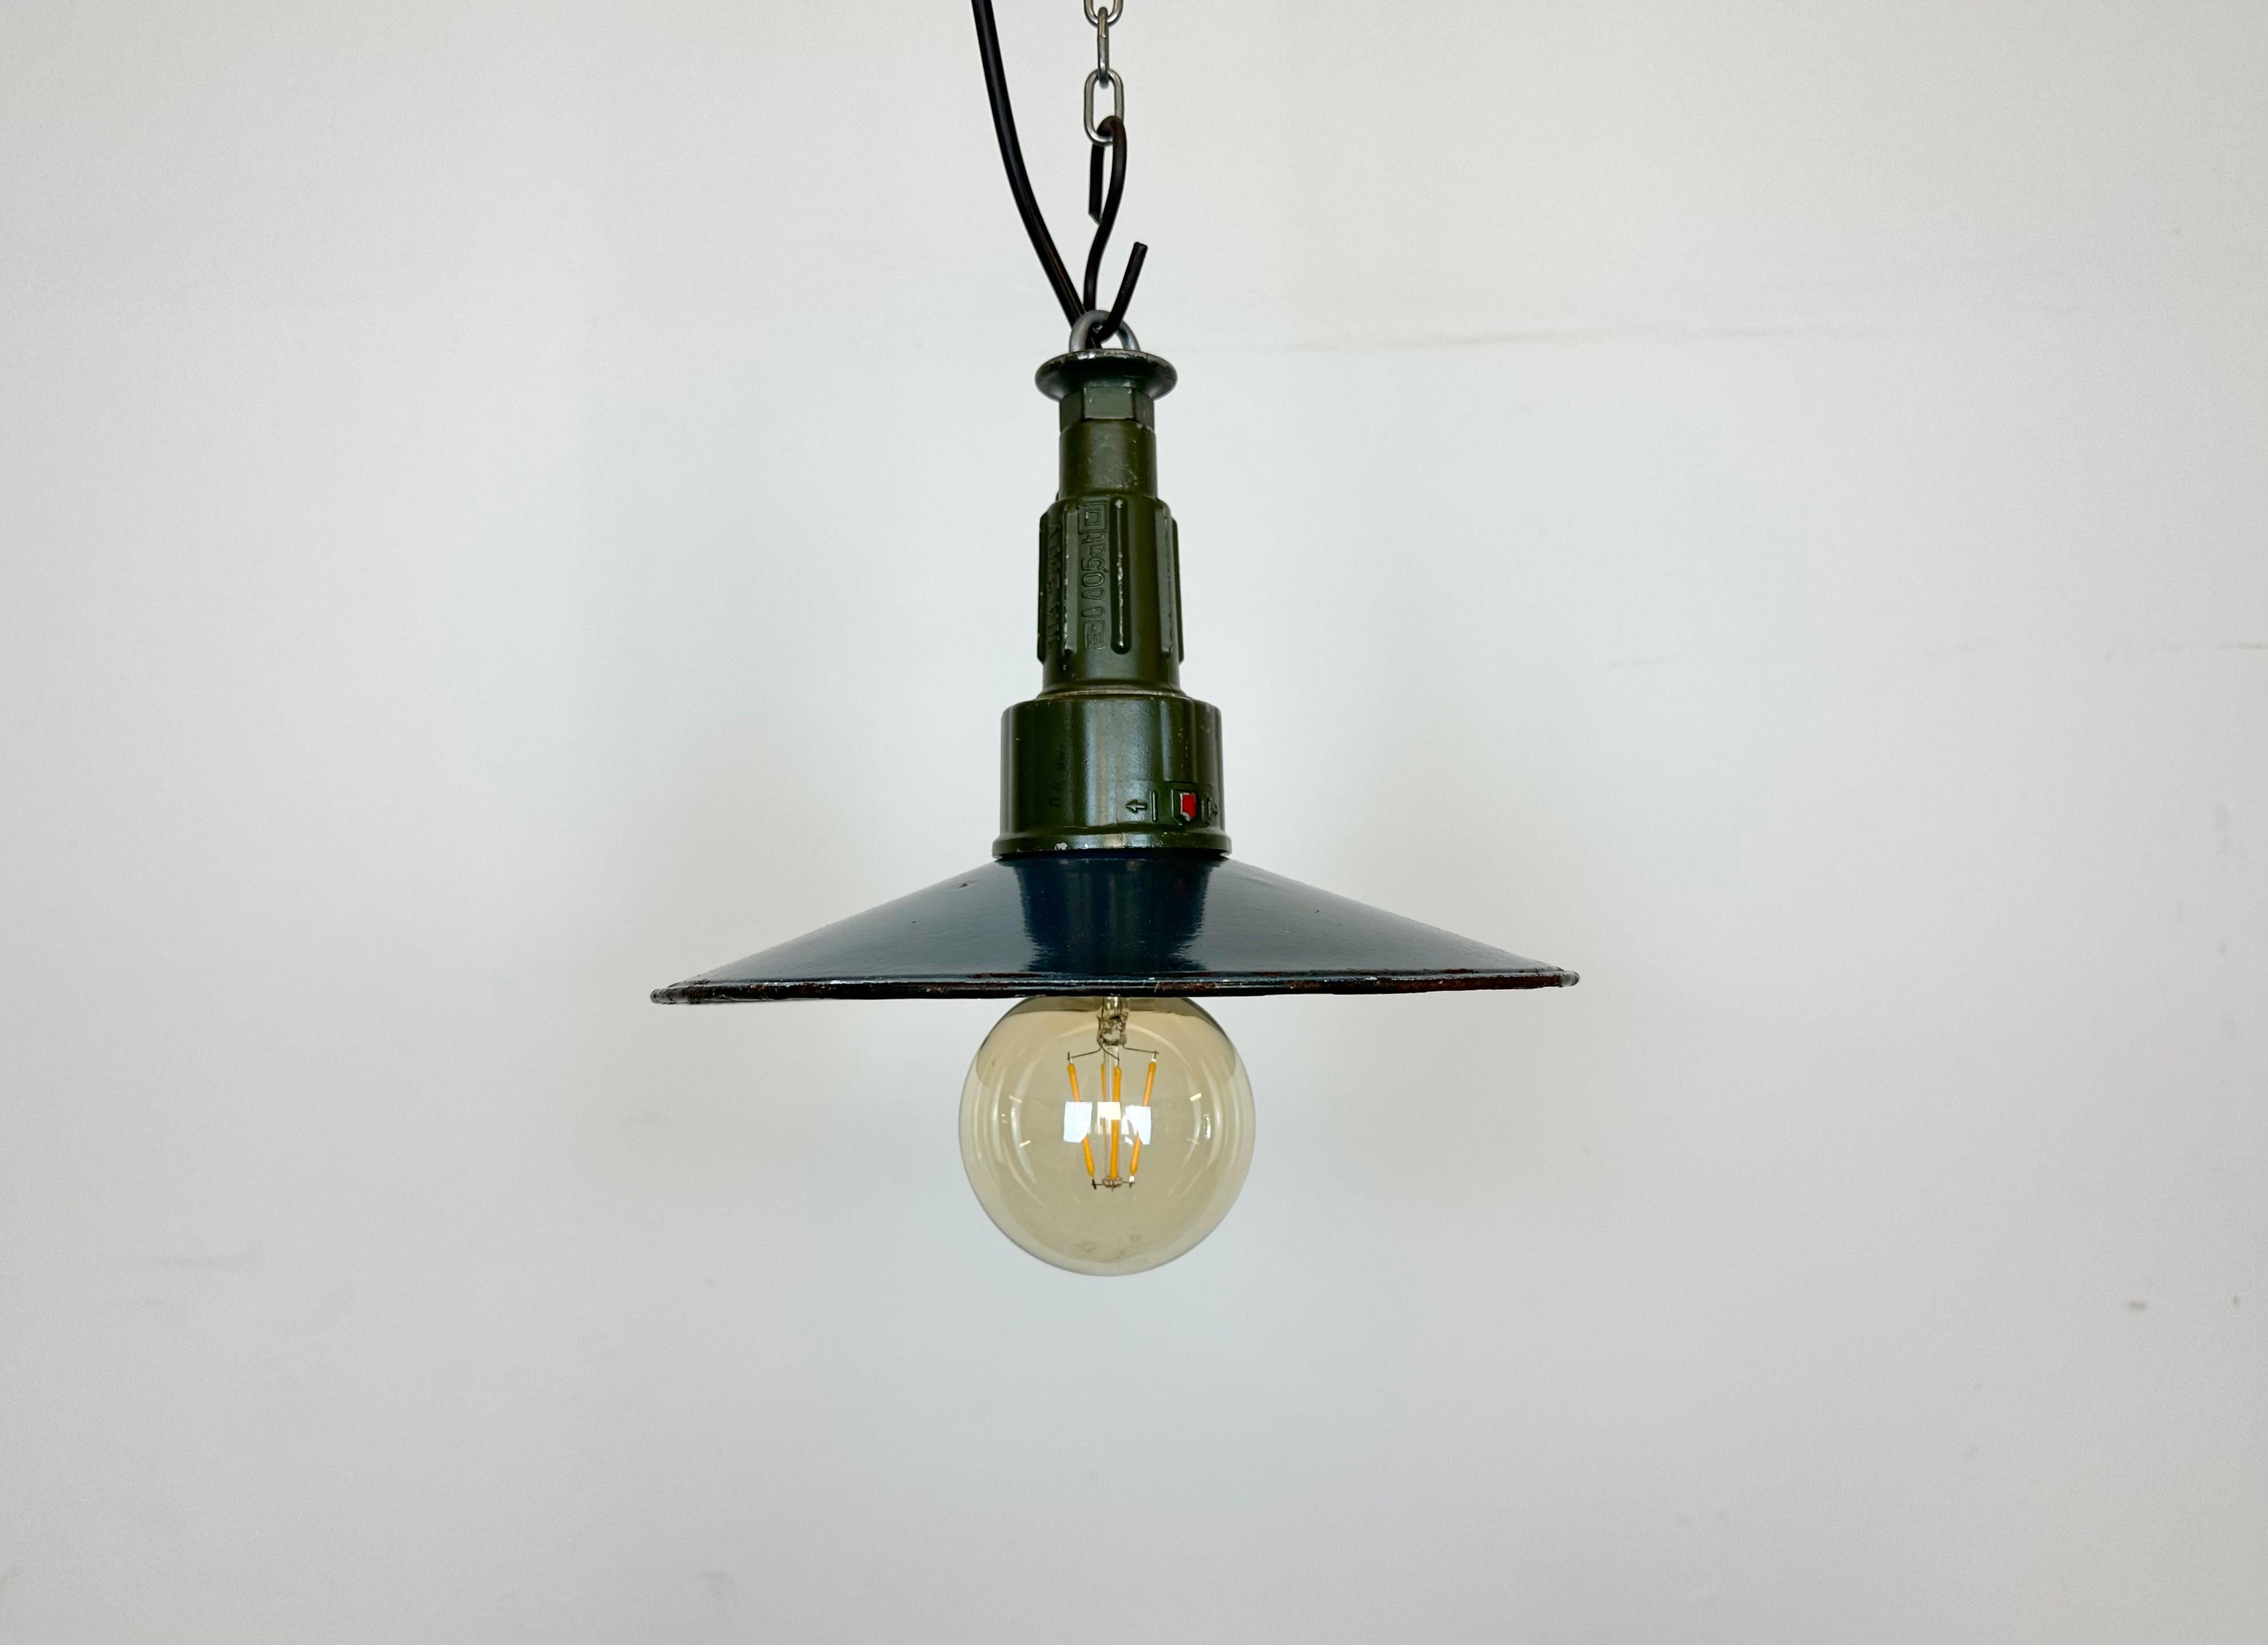 Industrial blue enamel pendant light made in Poland during the 1960s. White enamel inside the shade. Green cast aluminium top. The socket requires standard E 27/ E26 light bulbs. New wire. The weight of the lamp is 0.5 kg.
The light bulb is not